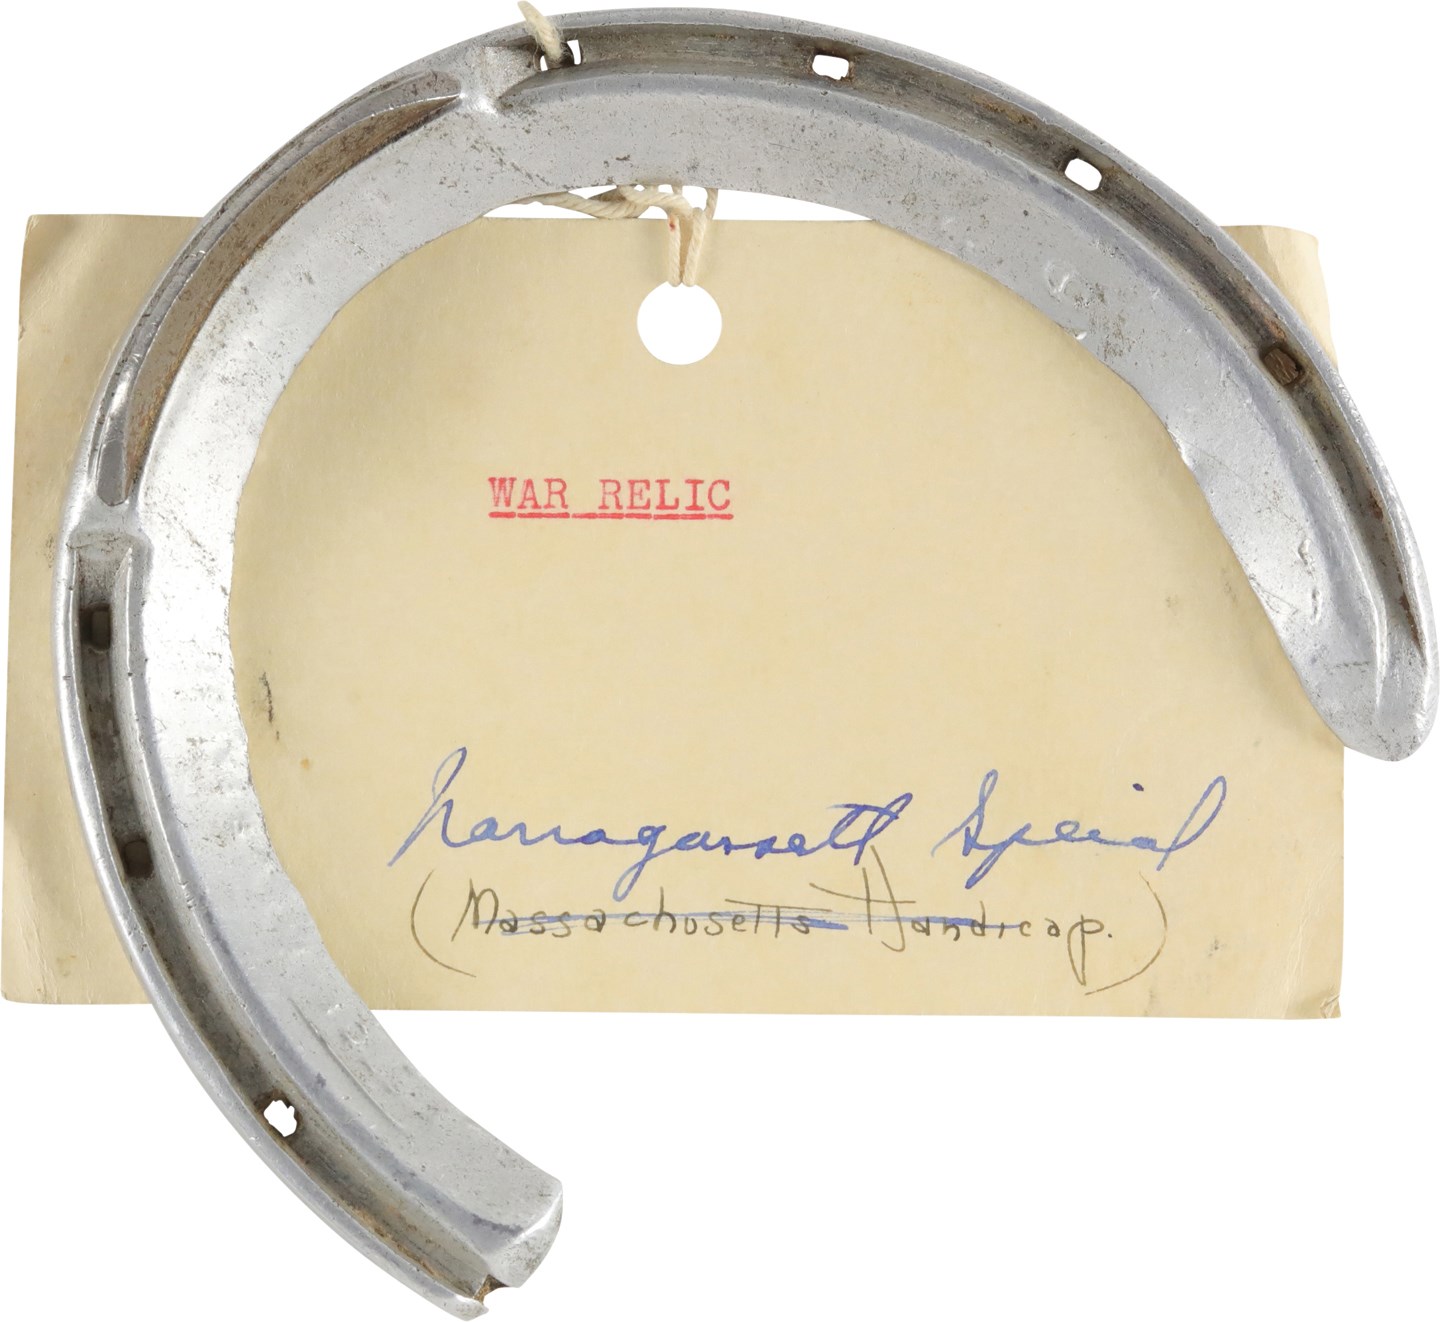 1941 "War Relic" Horseshoe Attributed to Narragansett Special Victory